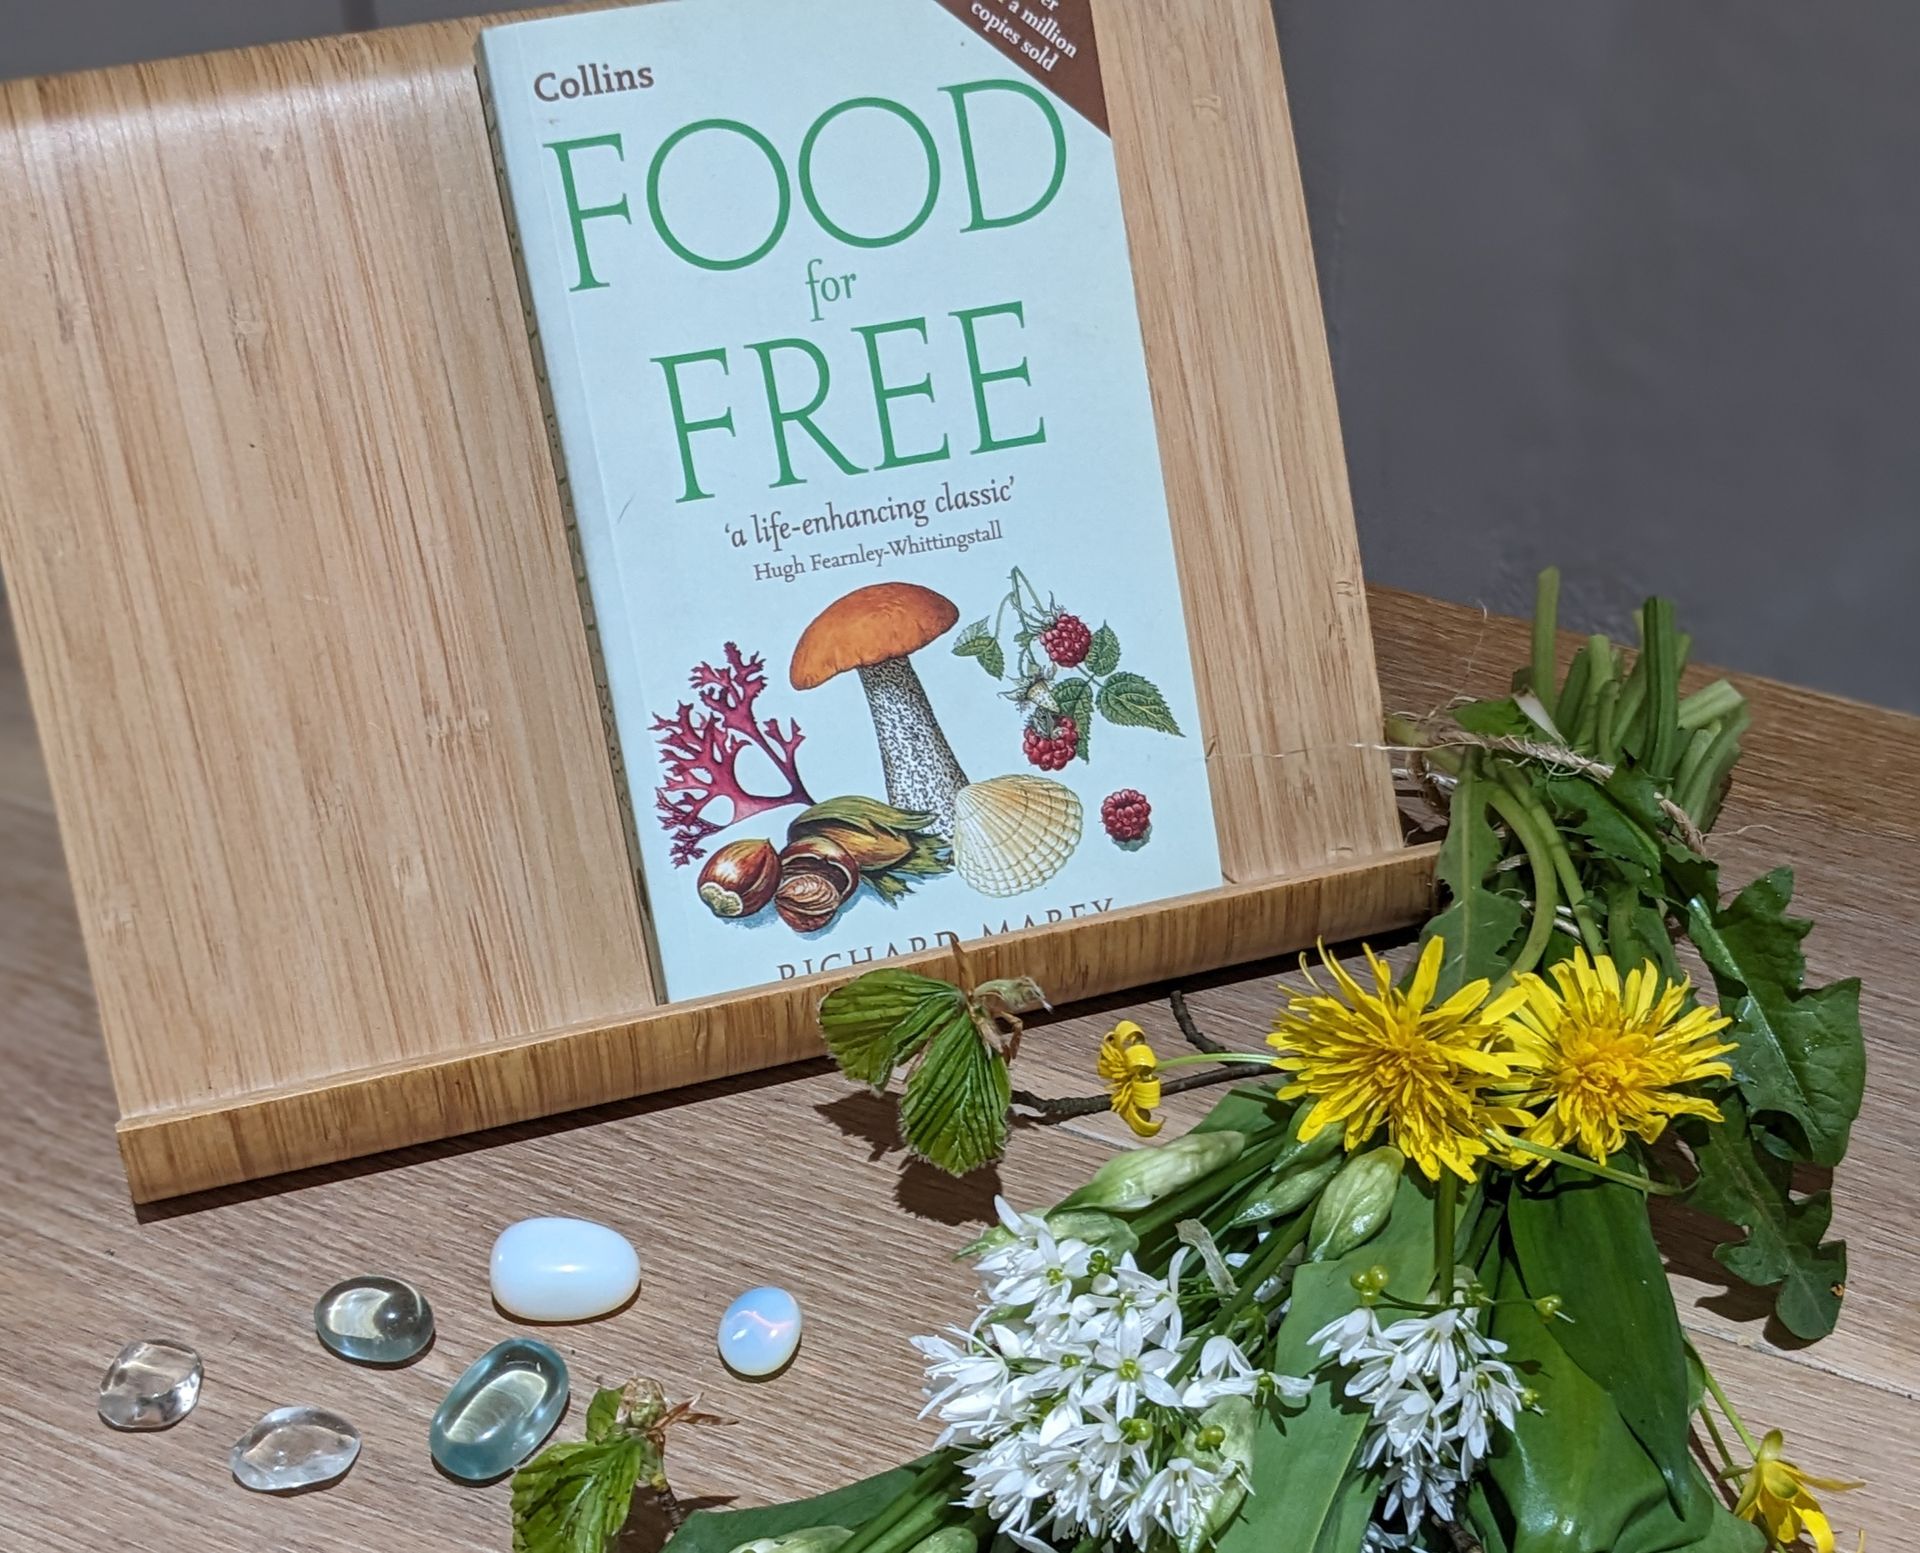 Food For Free by Richard Mabey - Book Review by Sue Cartwright, Spiral Leaf